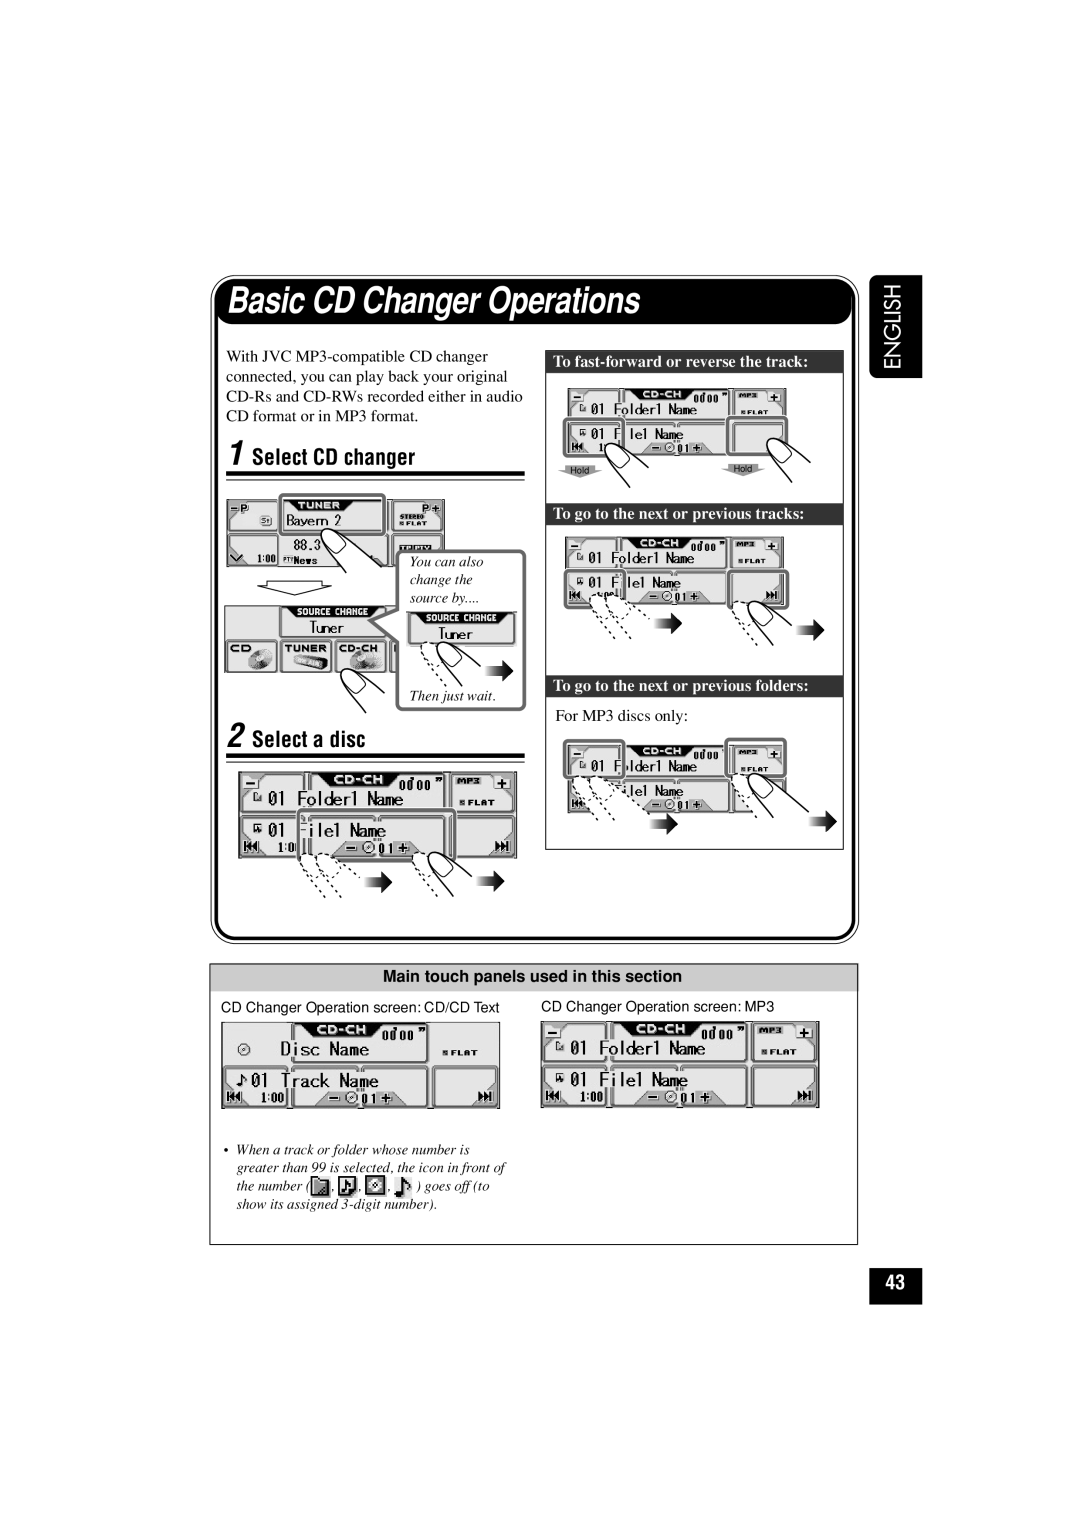 JVC KD-LHX501 Basic CD Changer Operations, Select CD changer, Select a disc, English, To fast-forwardor reverse the track 